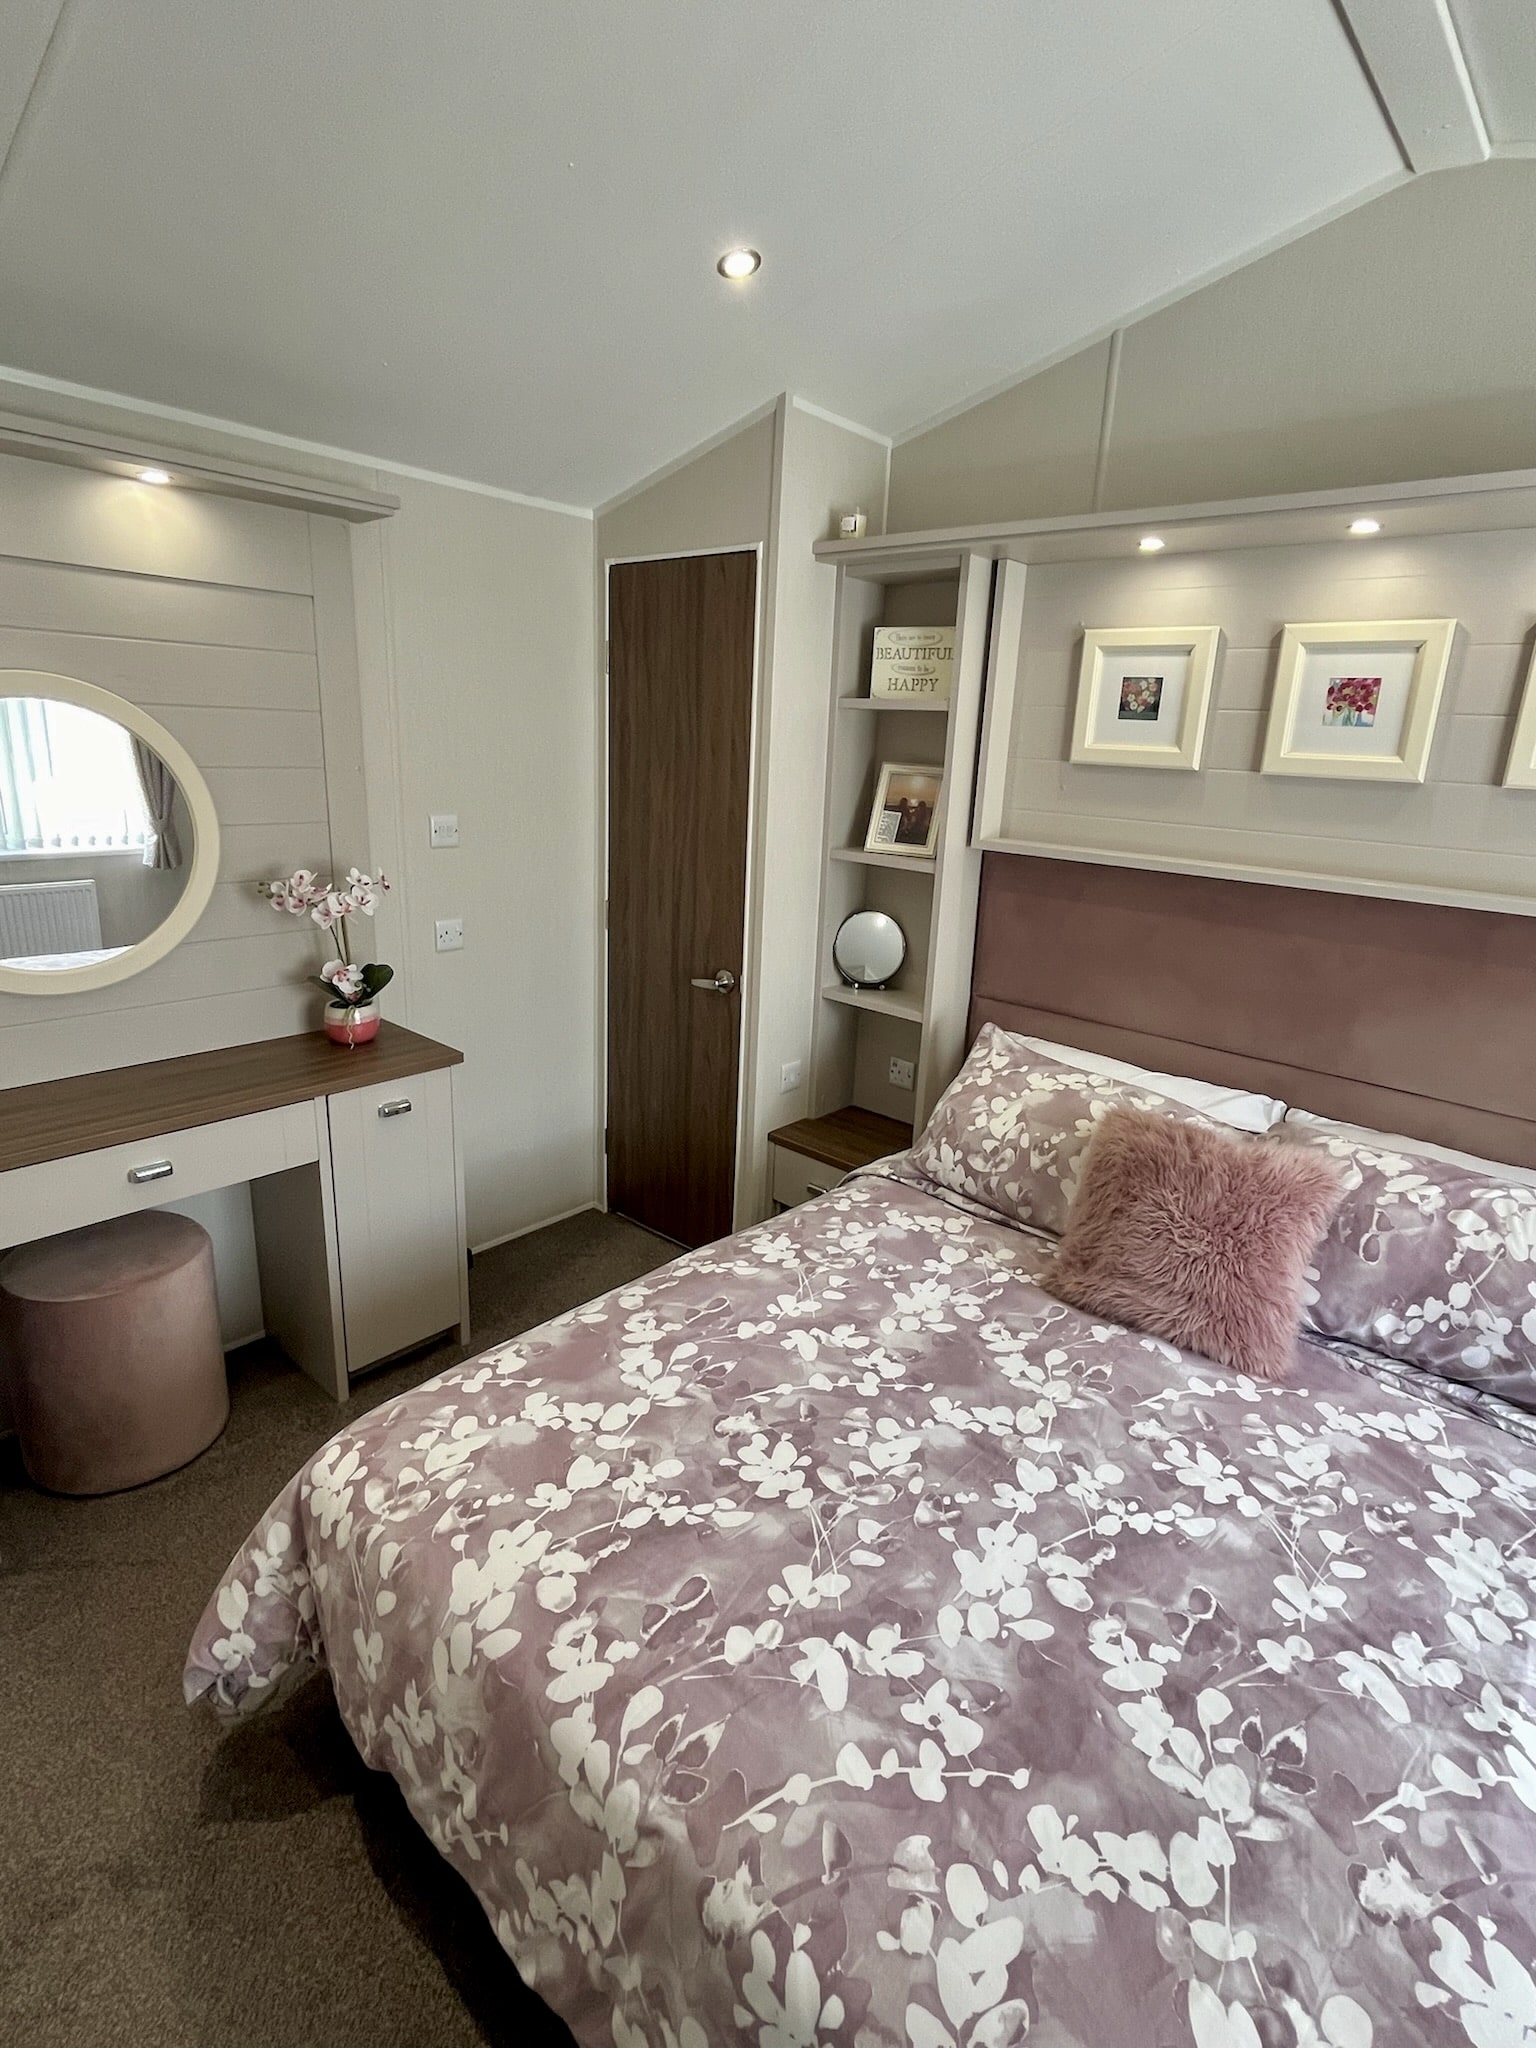 2021 Willerby Sheraton Lodge for sale at Pentire Coastal Holiday Park, Bude